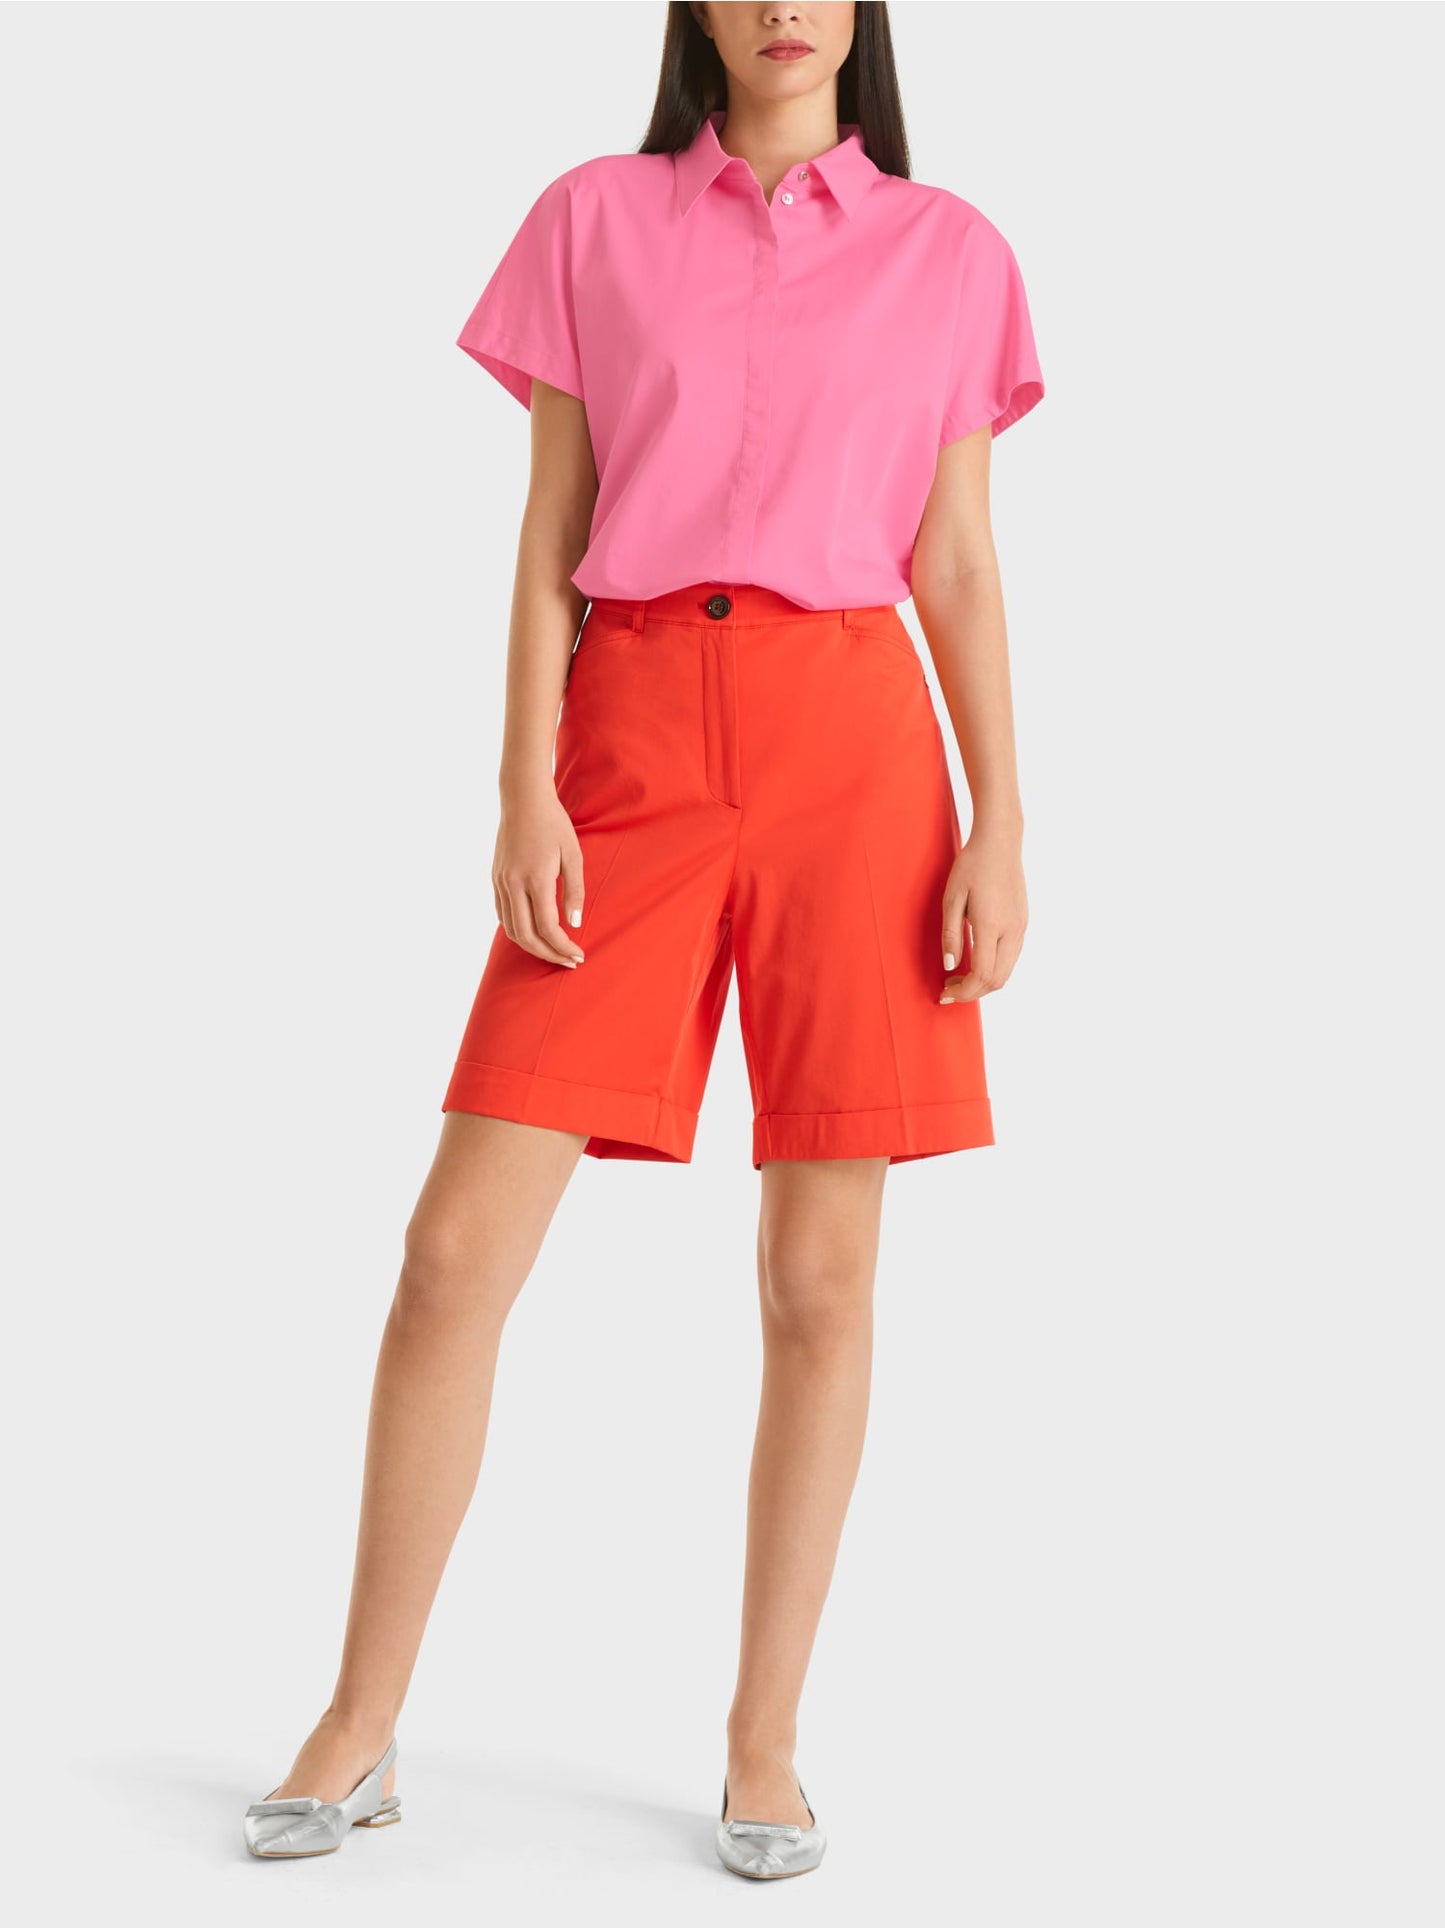 Shorts with turned-up hems